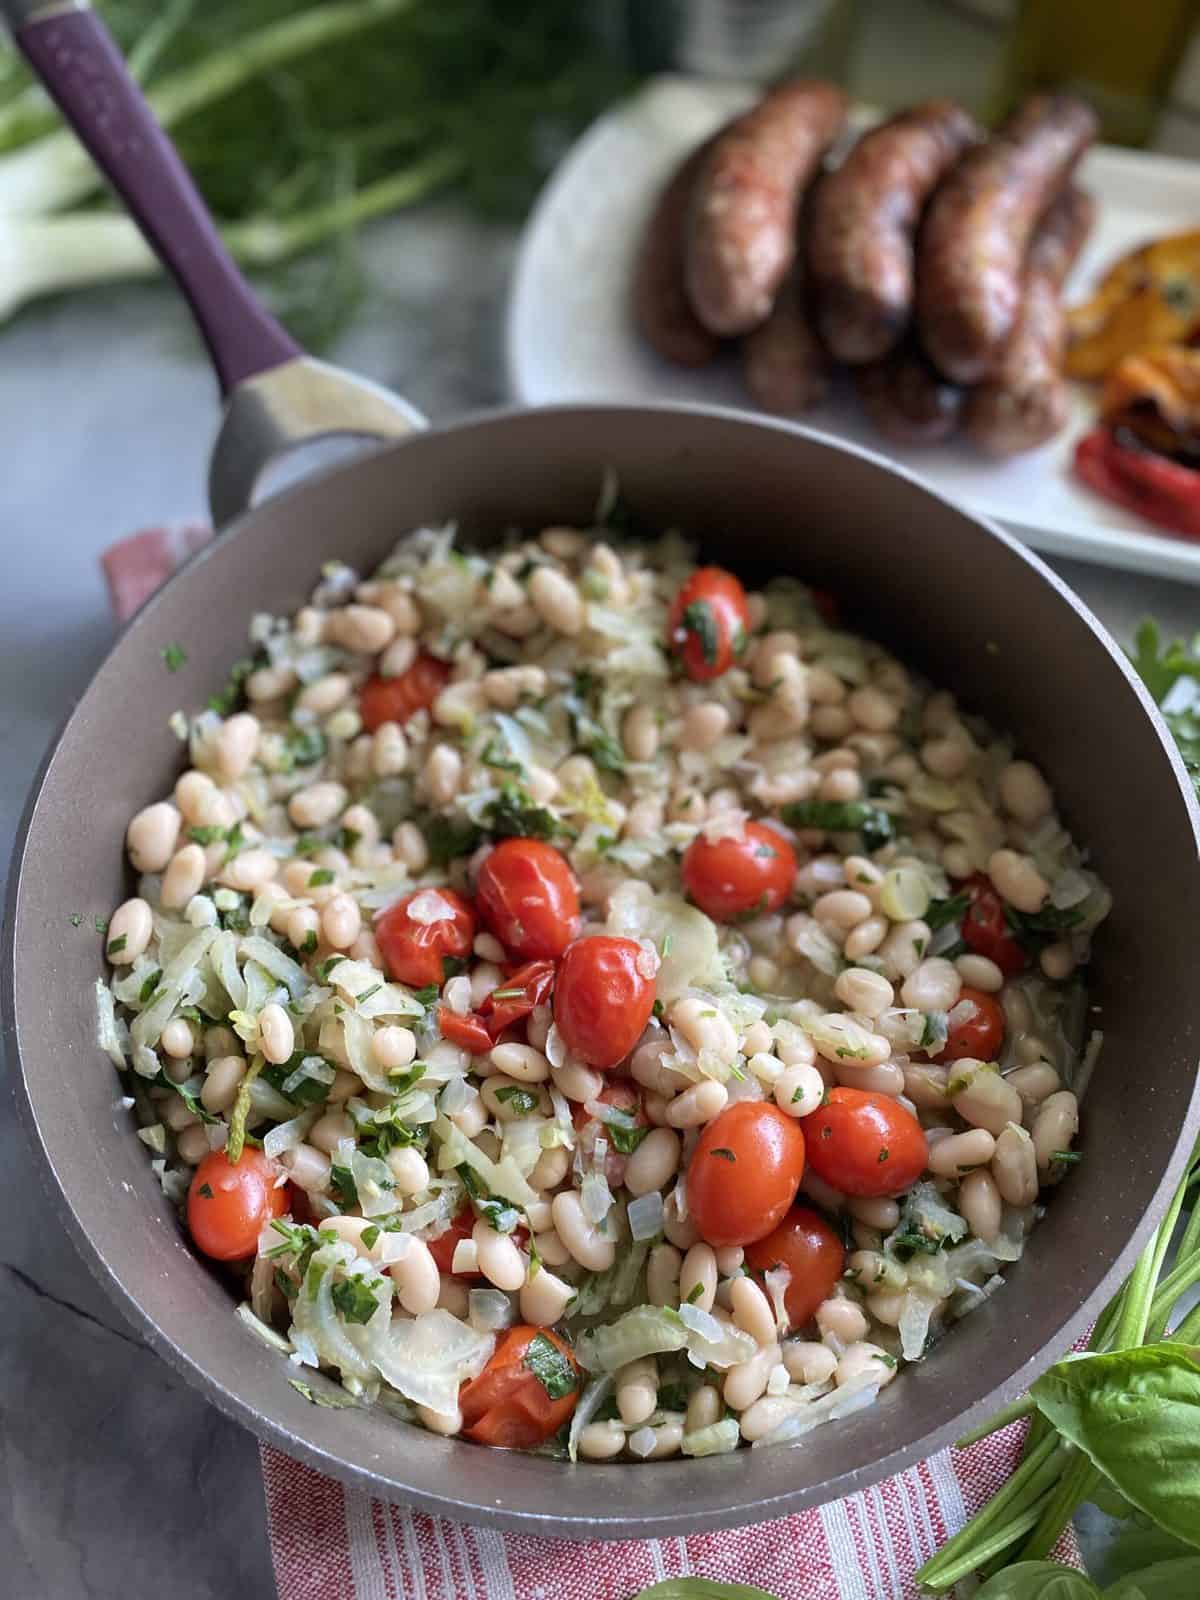 Brown skillet filled with white beans, fennel, and tomatoes with fresh herbs.